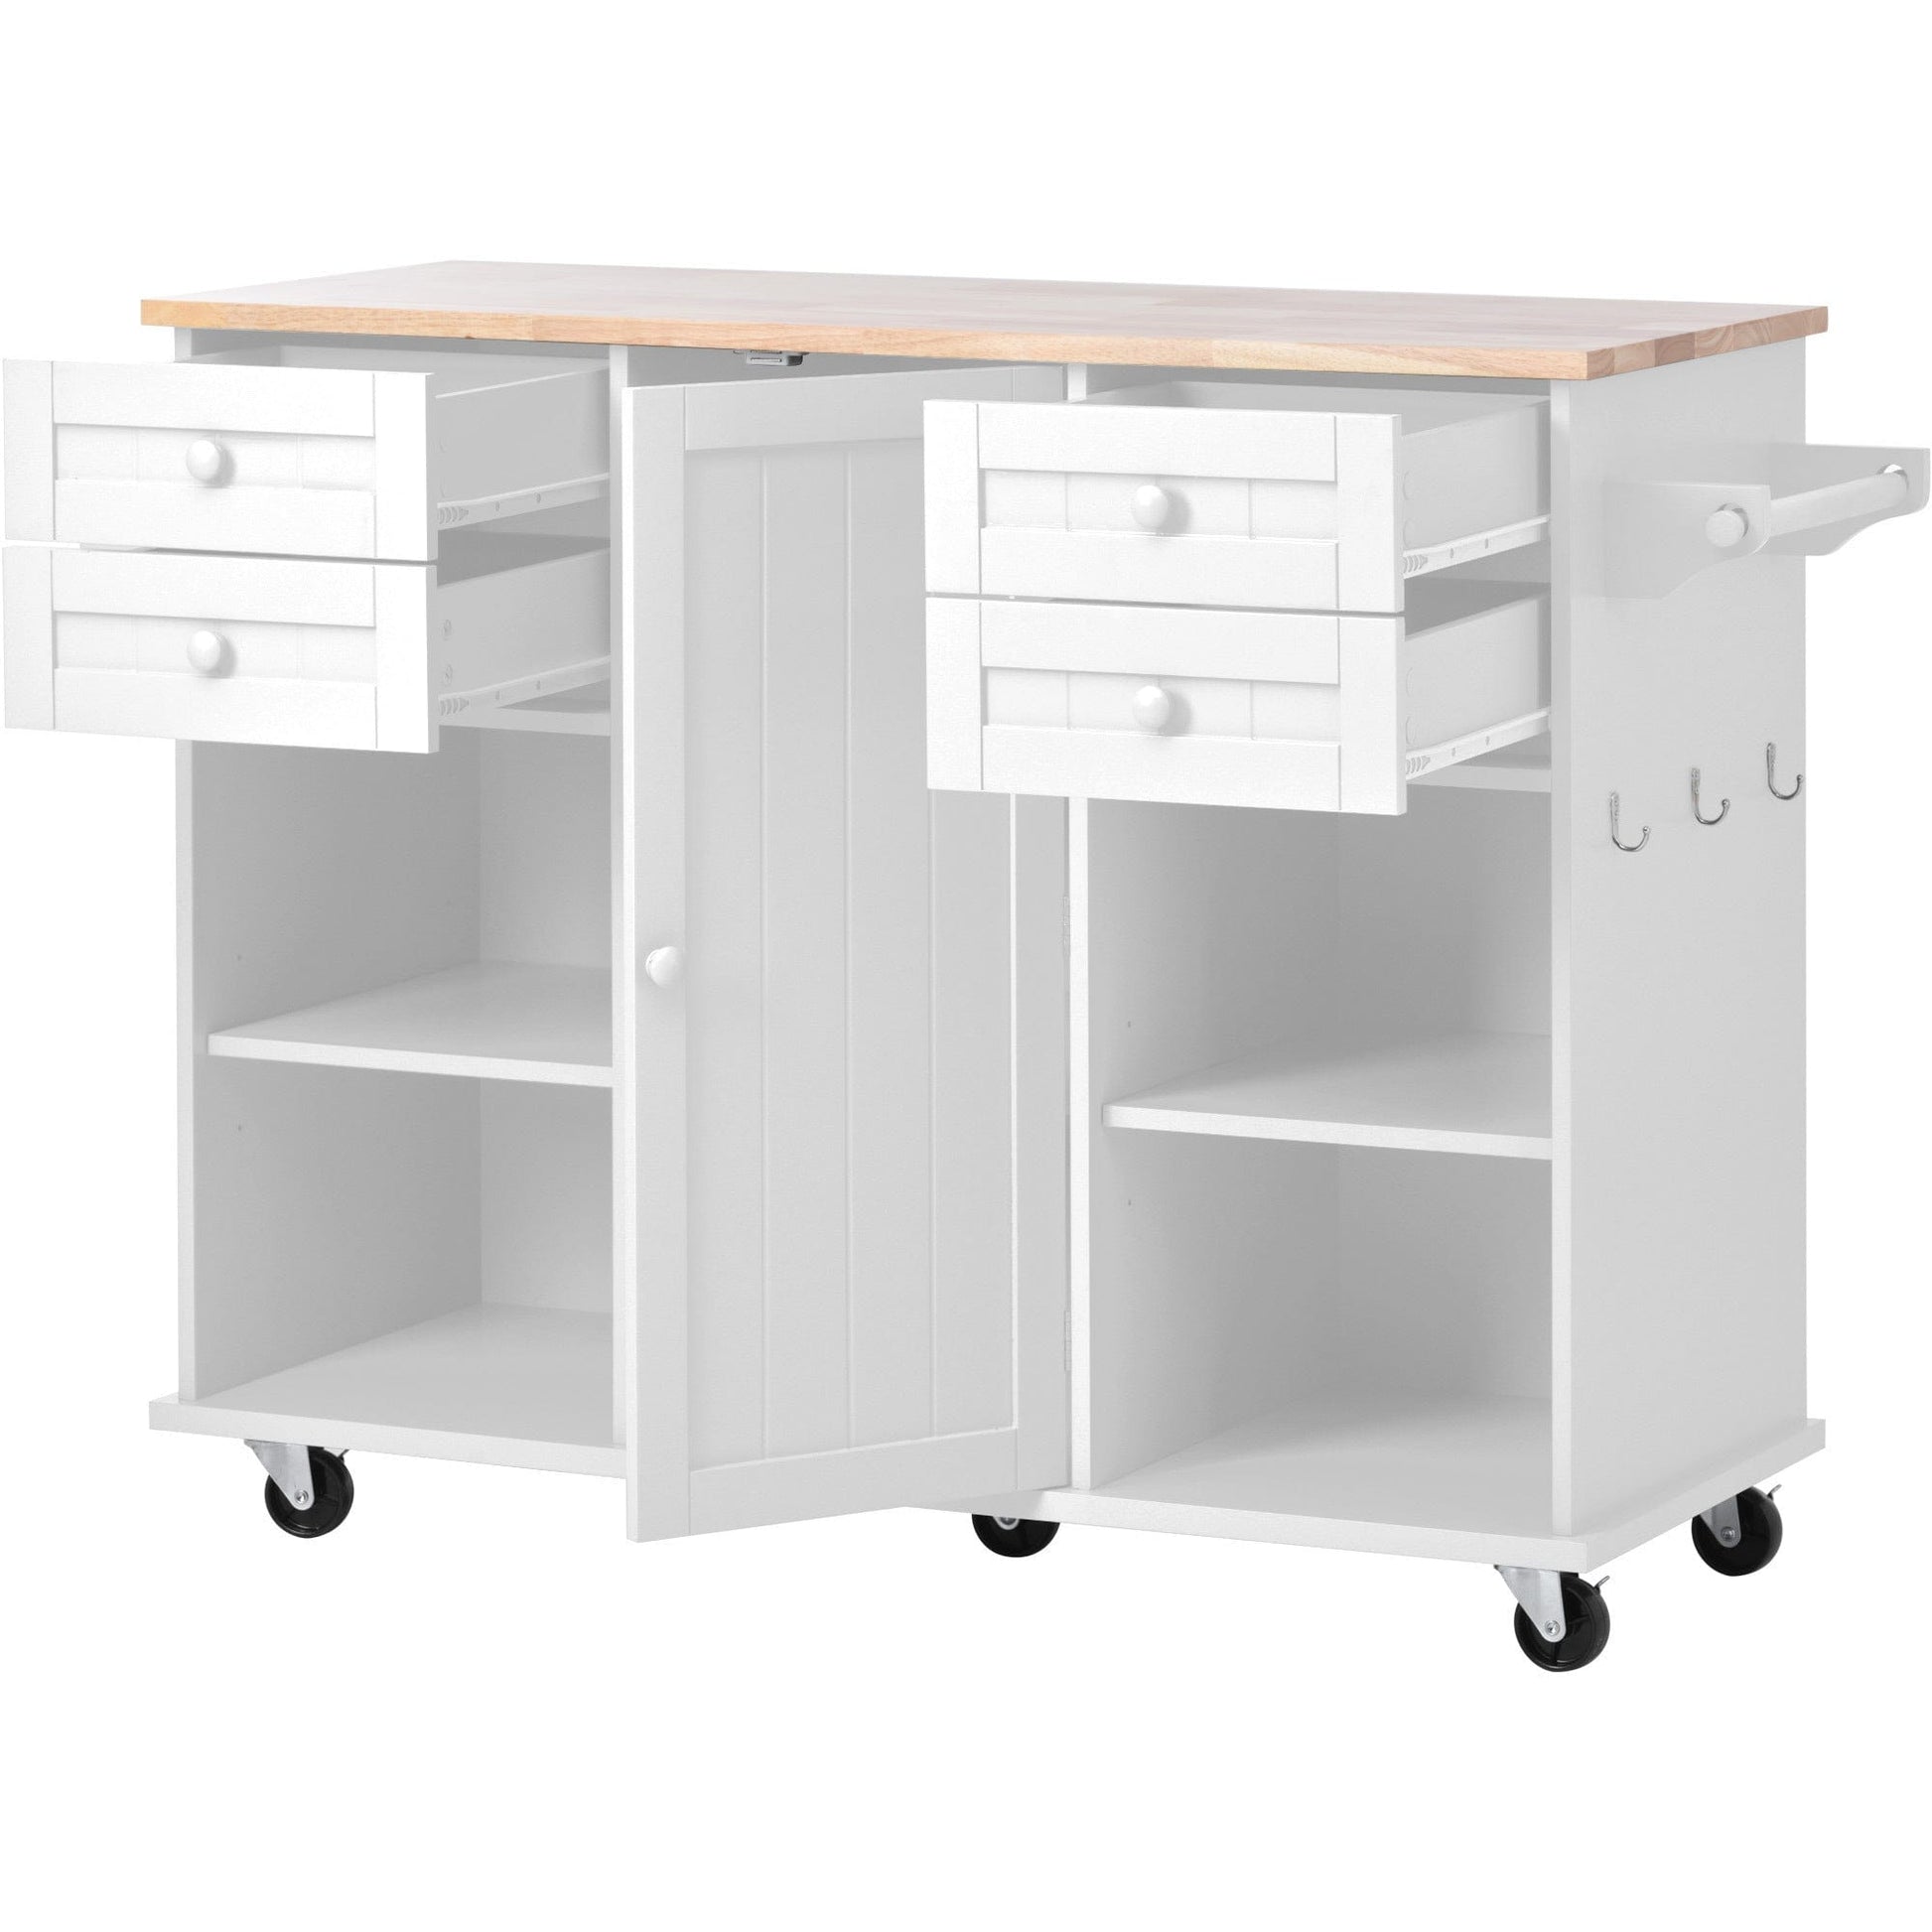 1st Choice Furniture Direct Kitchen Island Cart 1st Choice Functional Stylish Kitchen Island Cart with Storage Solution